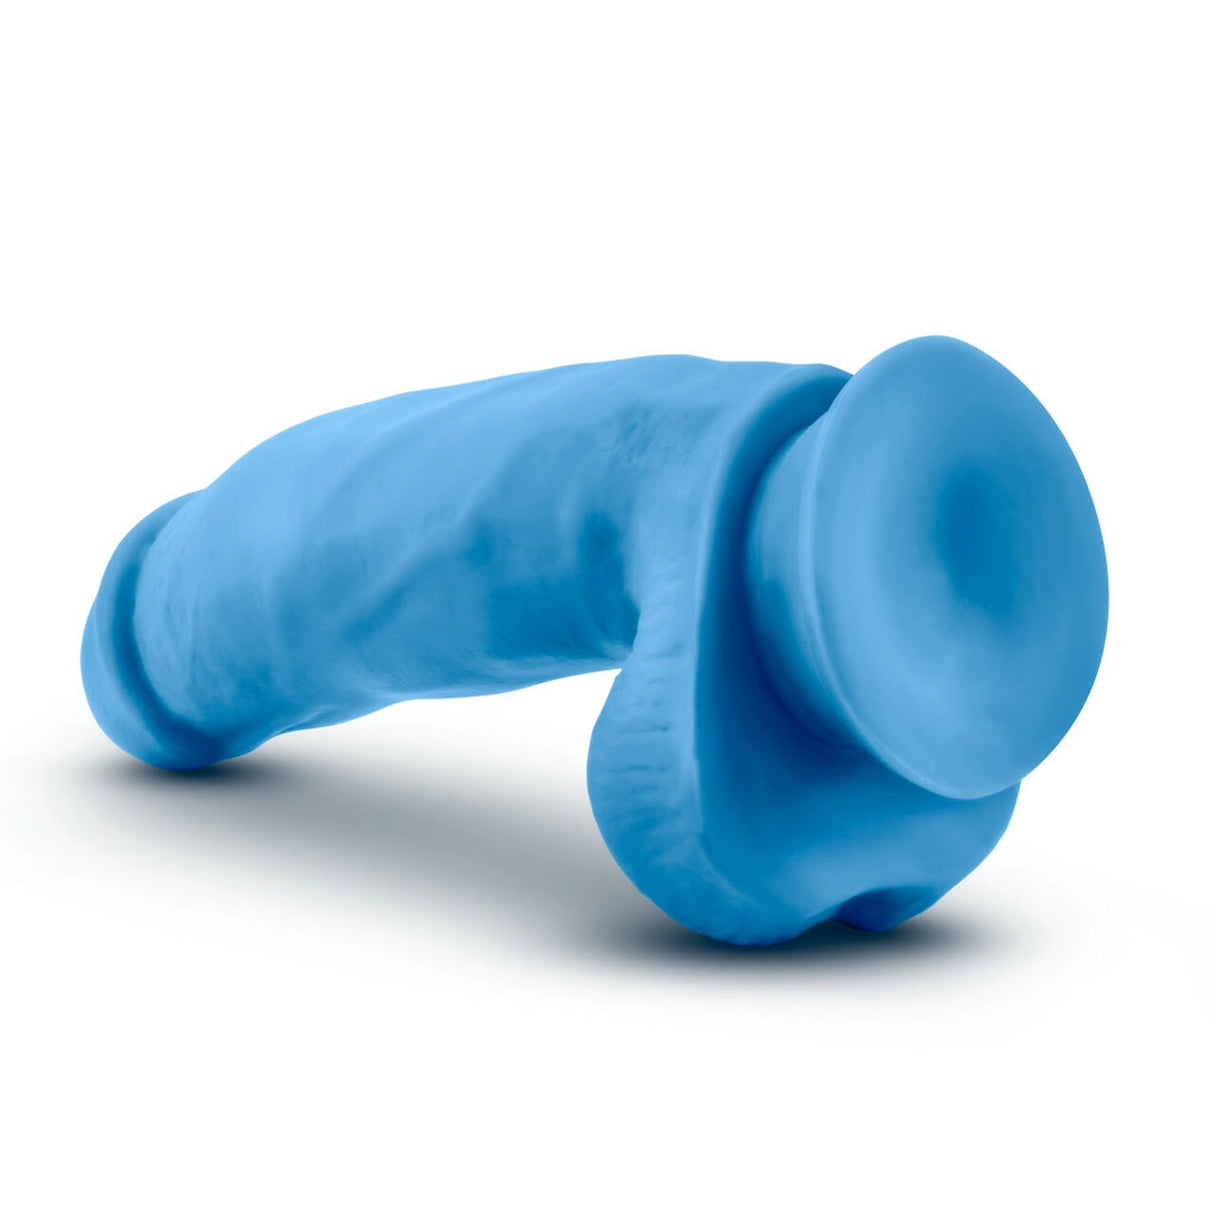 Neo Elite - 7 inch Silicone Dual Density Cock with Balls - Neon Blue